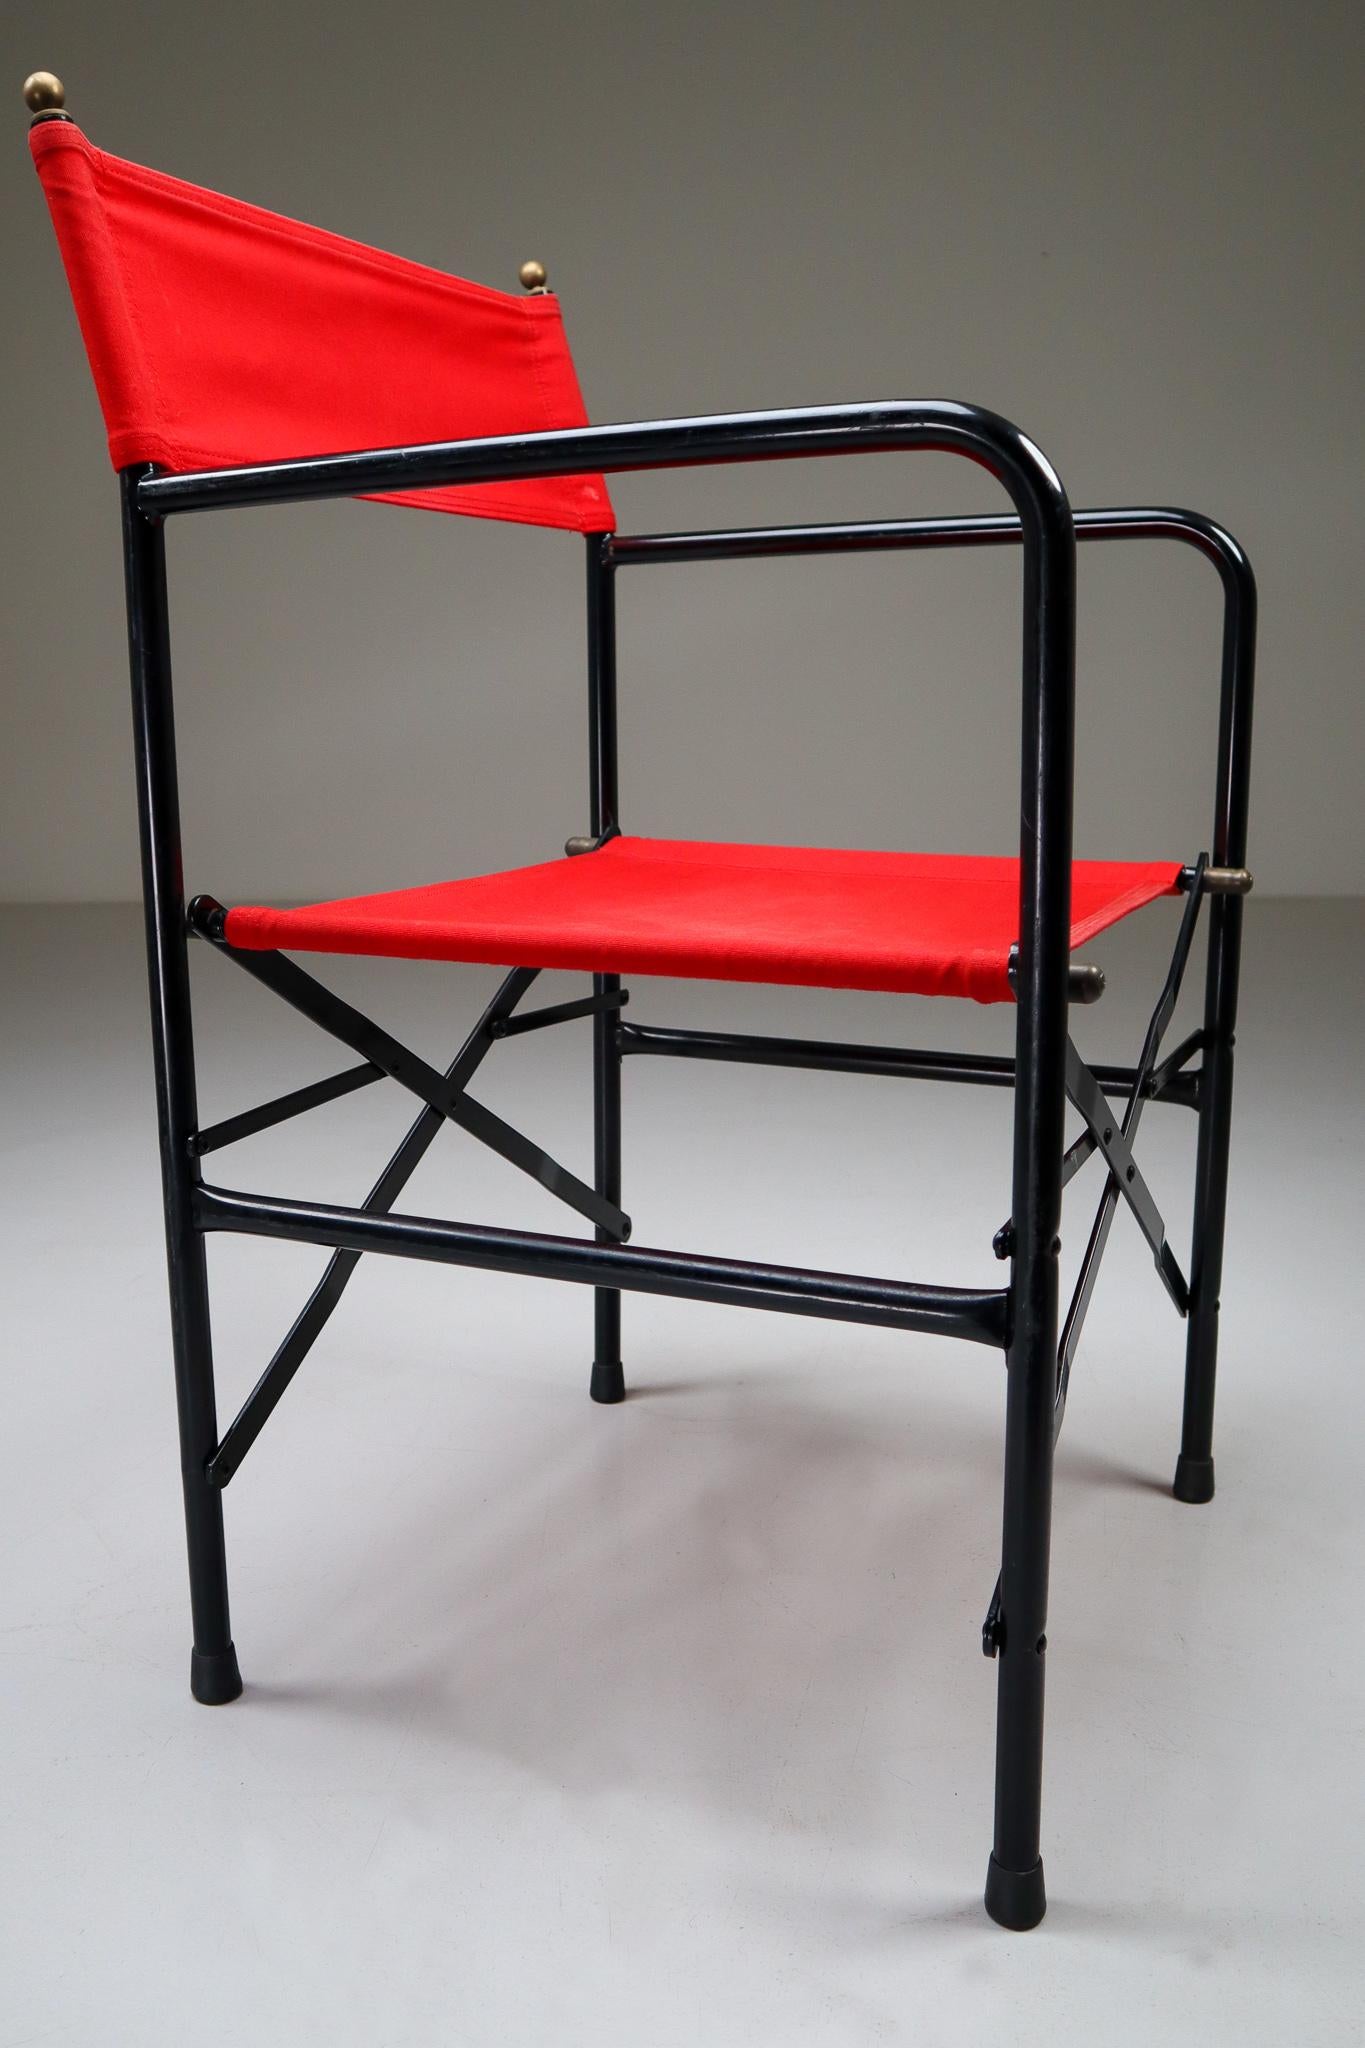 Modern 18 Venetian Folding-Patio-Garden Chairs in Steel, Brass and Red Fabric, 1980s For Sale